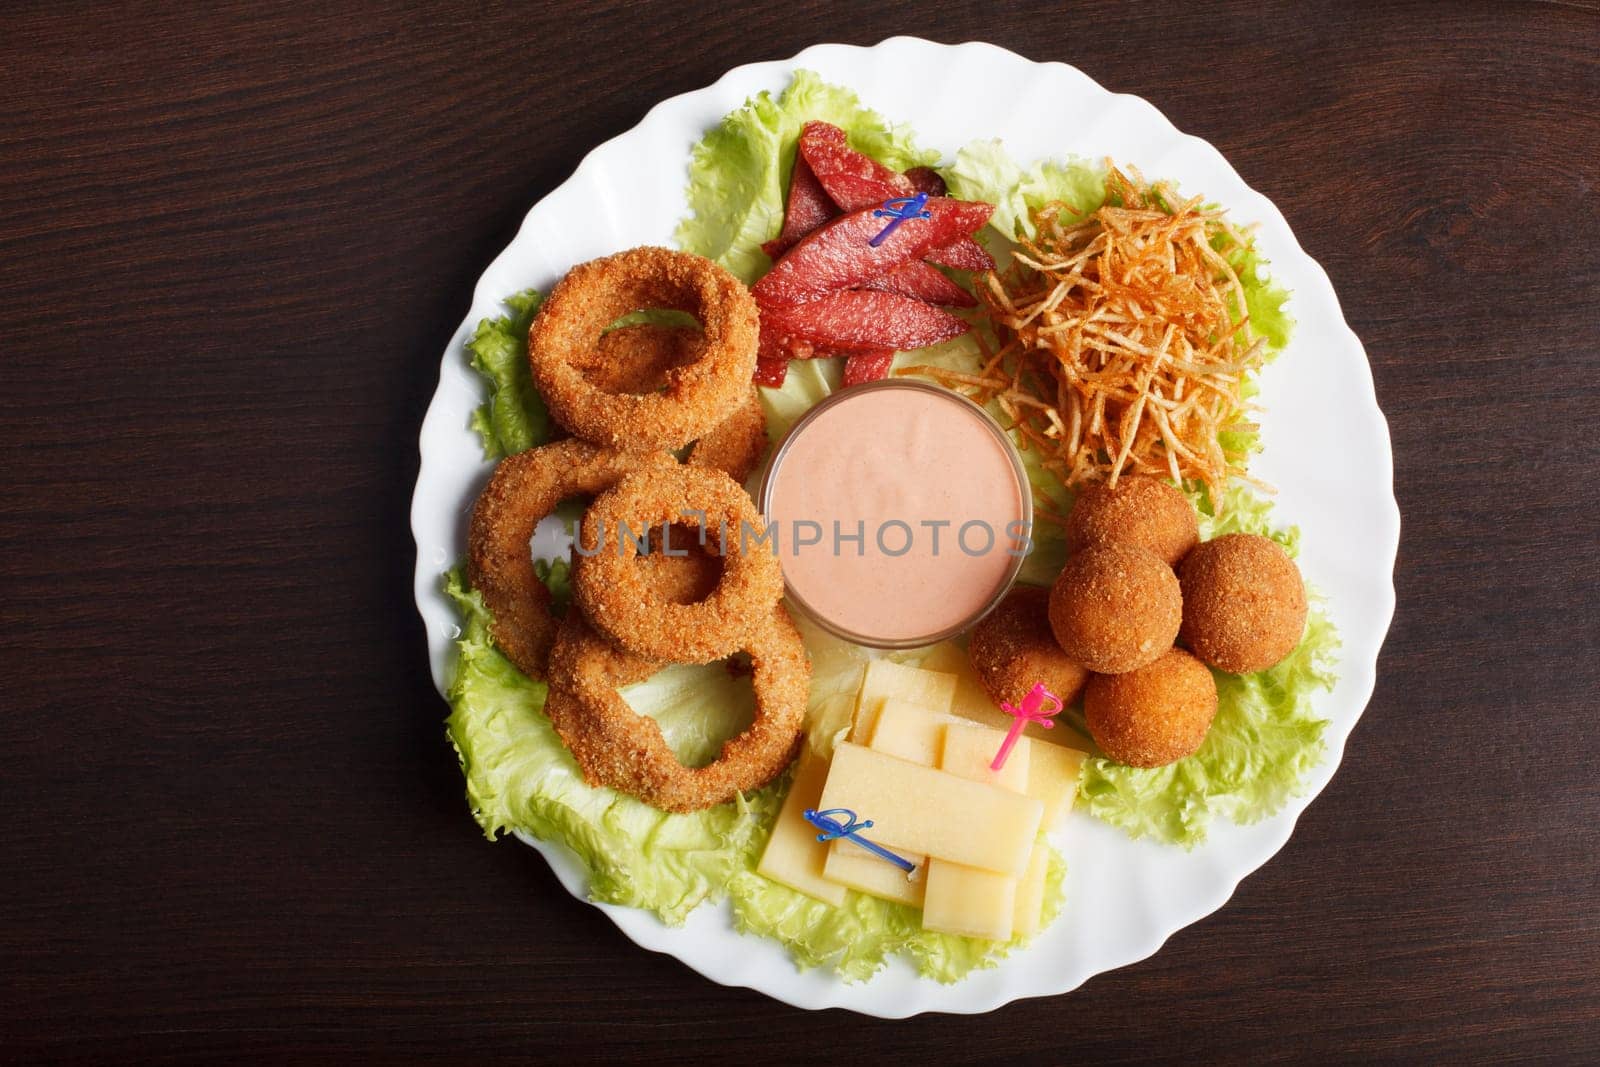 Image of crispy flavored snacks on plate, close-up